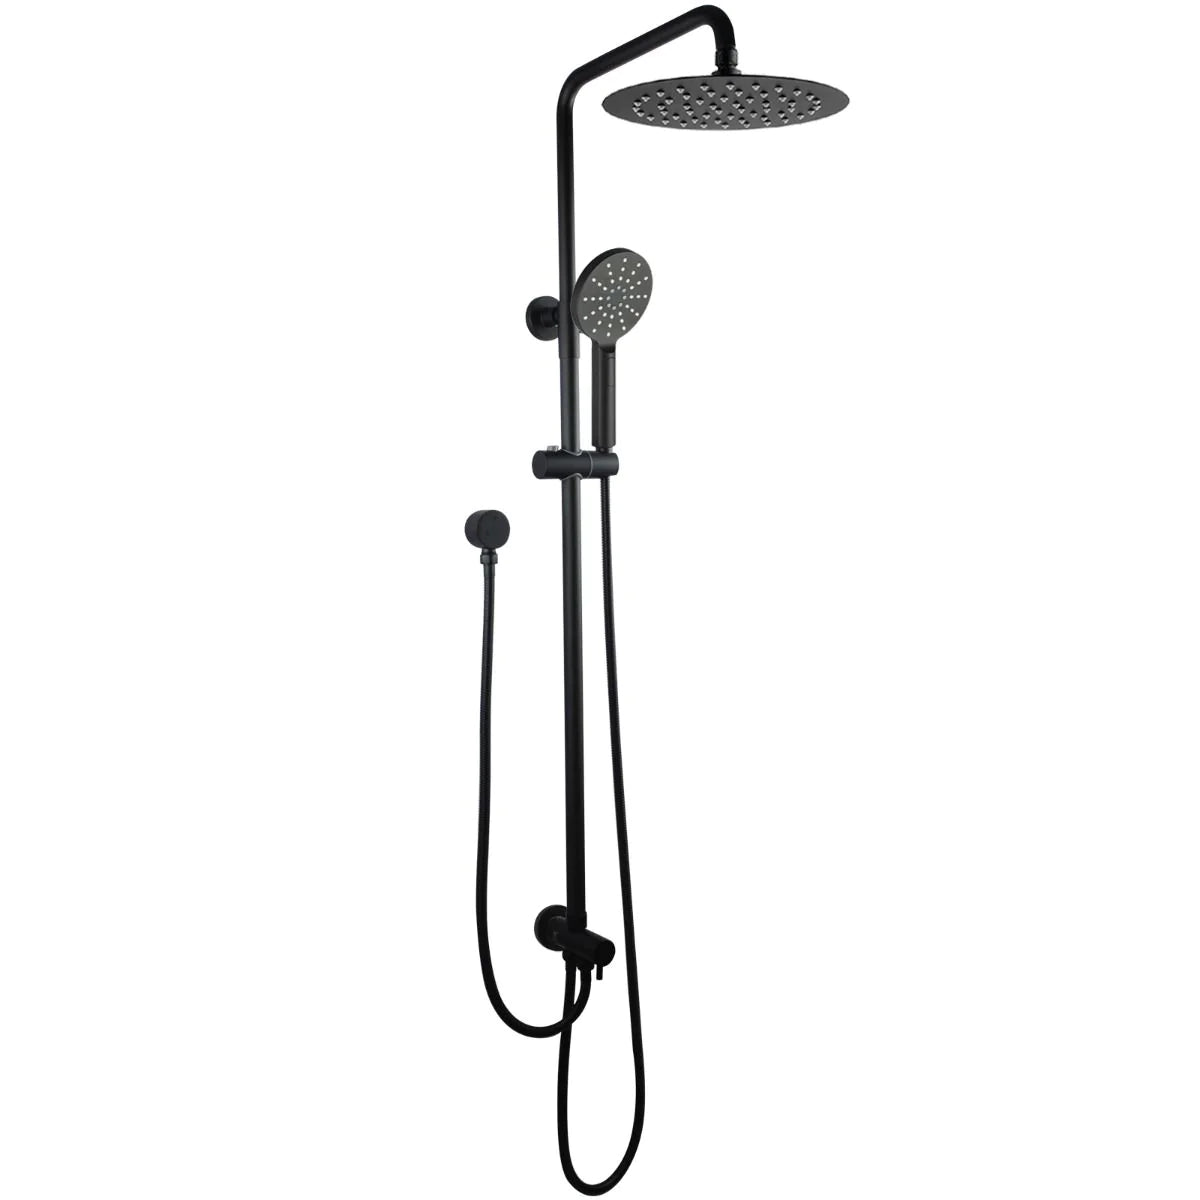 Circular Shower Station Featuring Versatile Top/Bottom Water Inlet for Flexibility-CH2152-SH-N+CH0007-SH+CH-R11-HHS